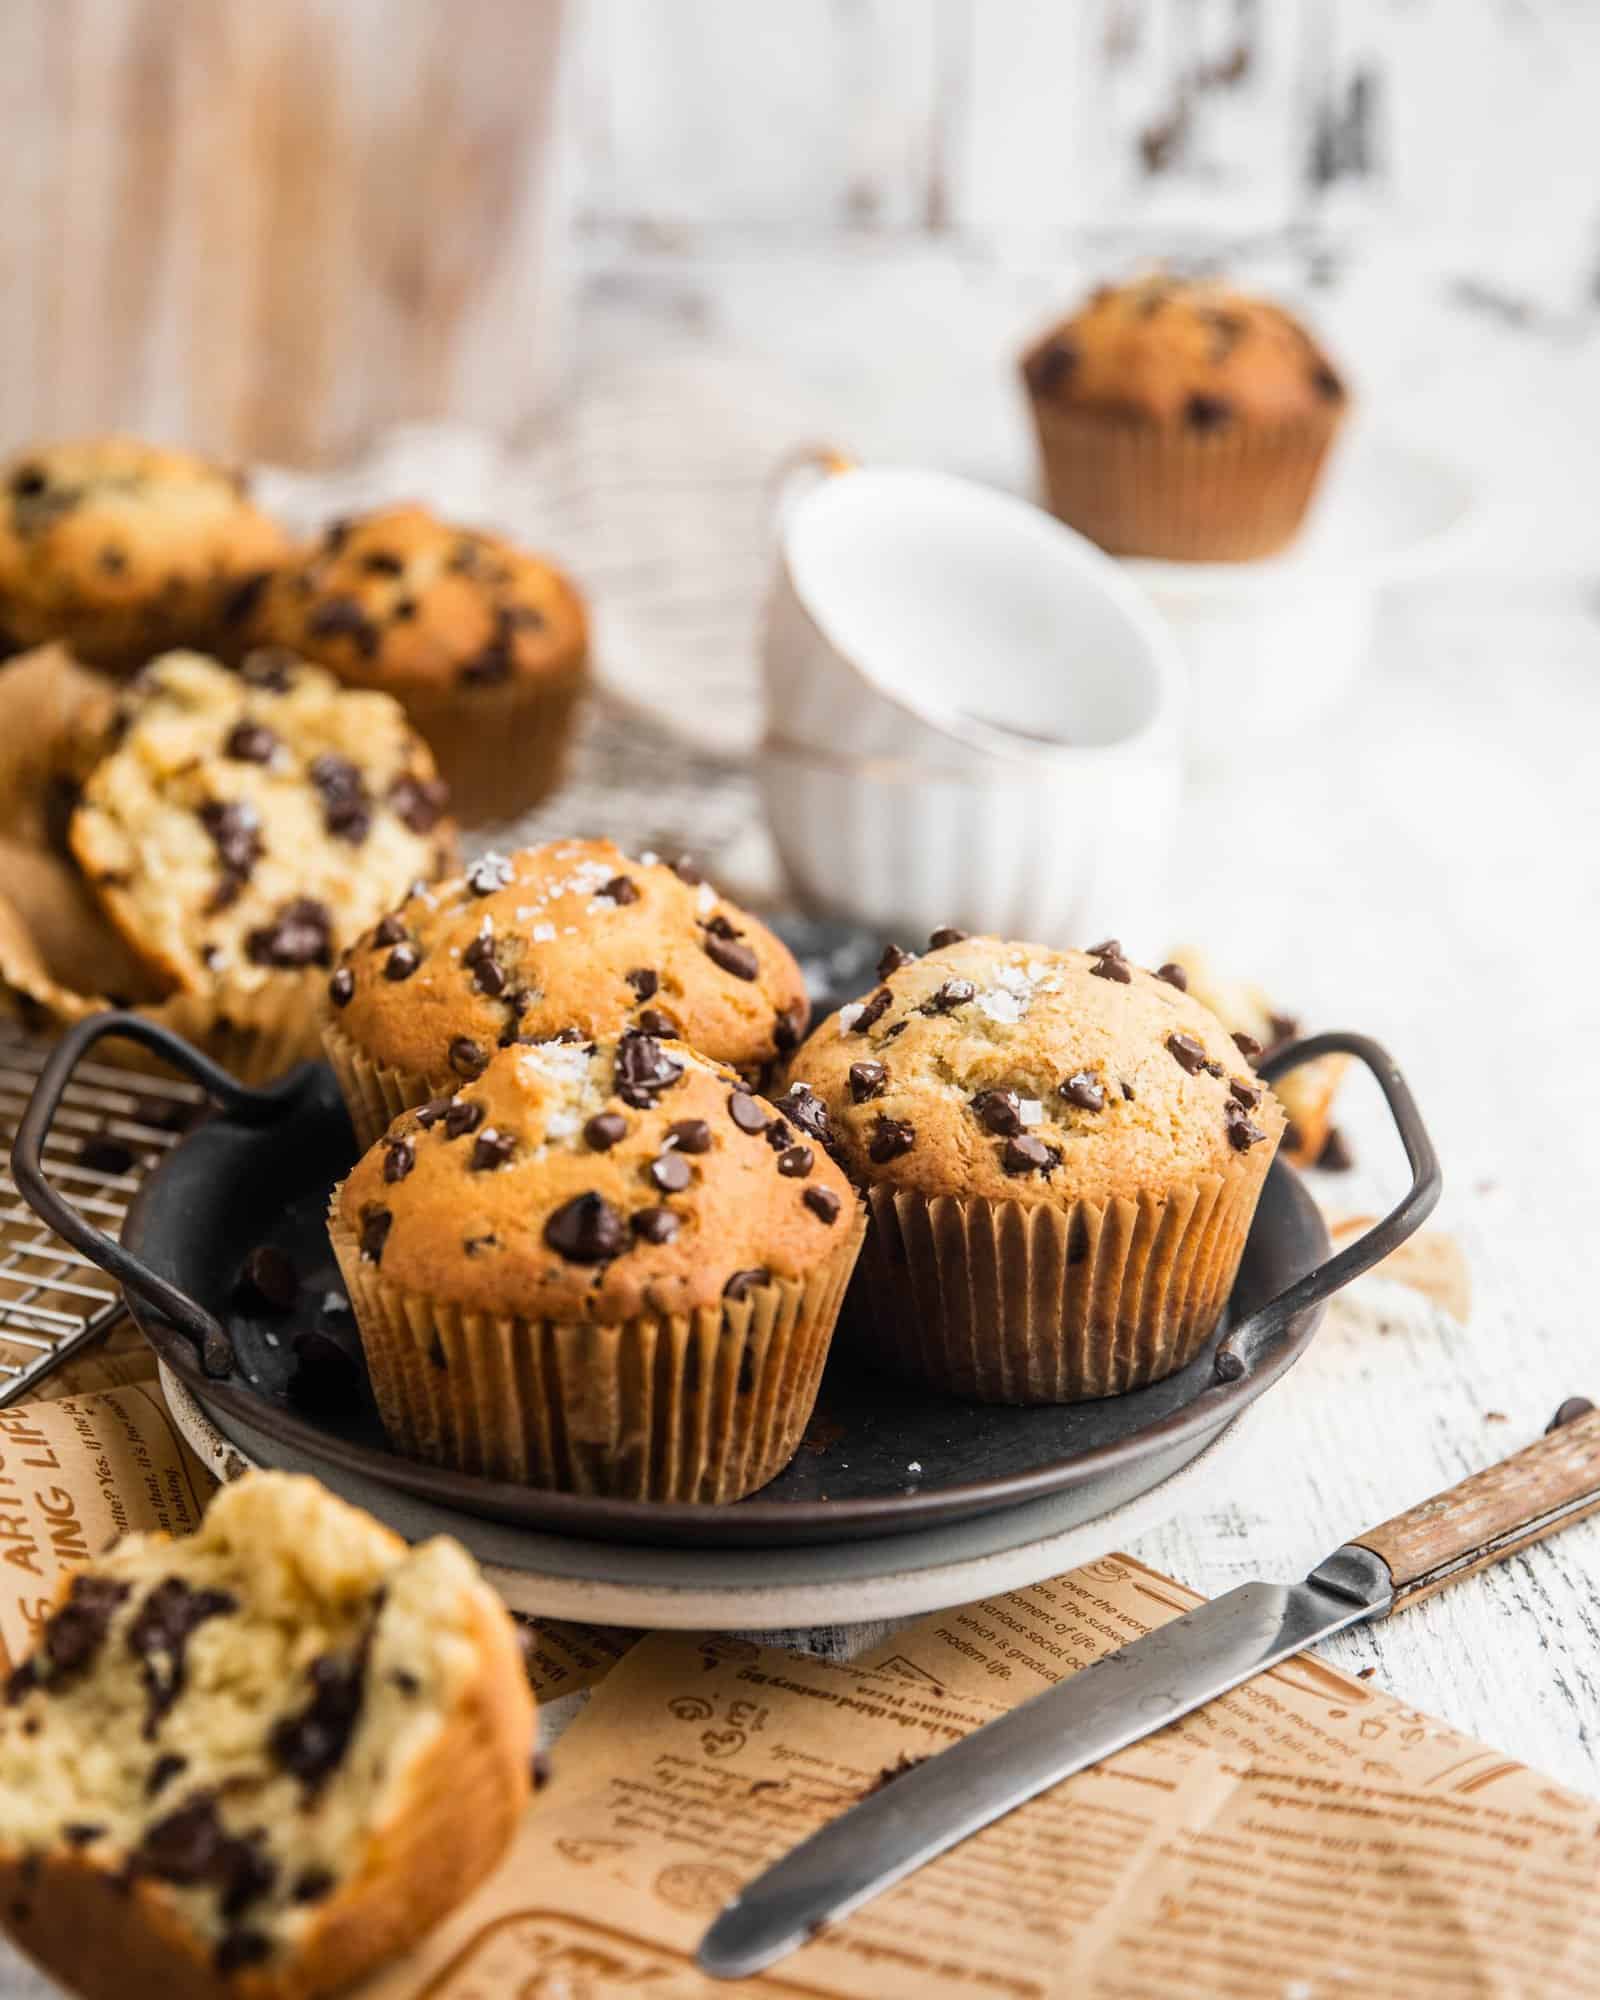 Bakery style chocolate chip muffins on a serving tray